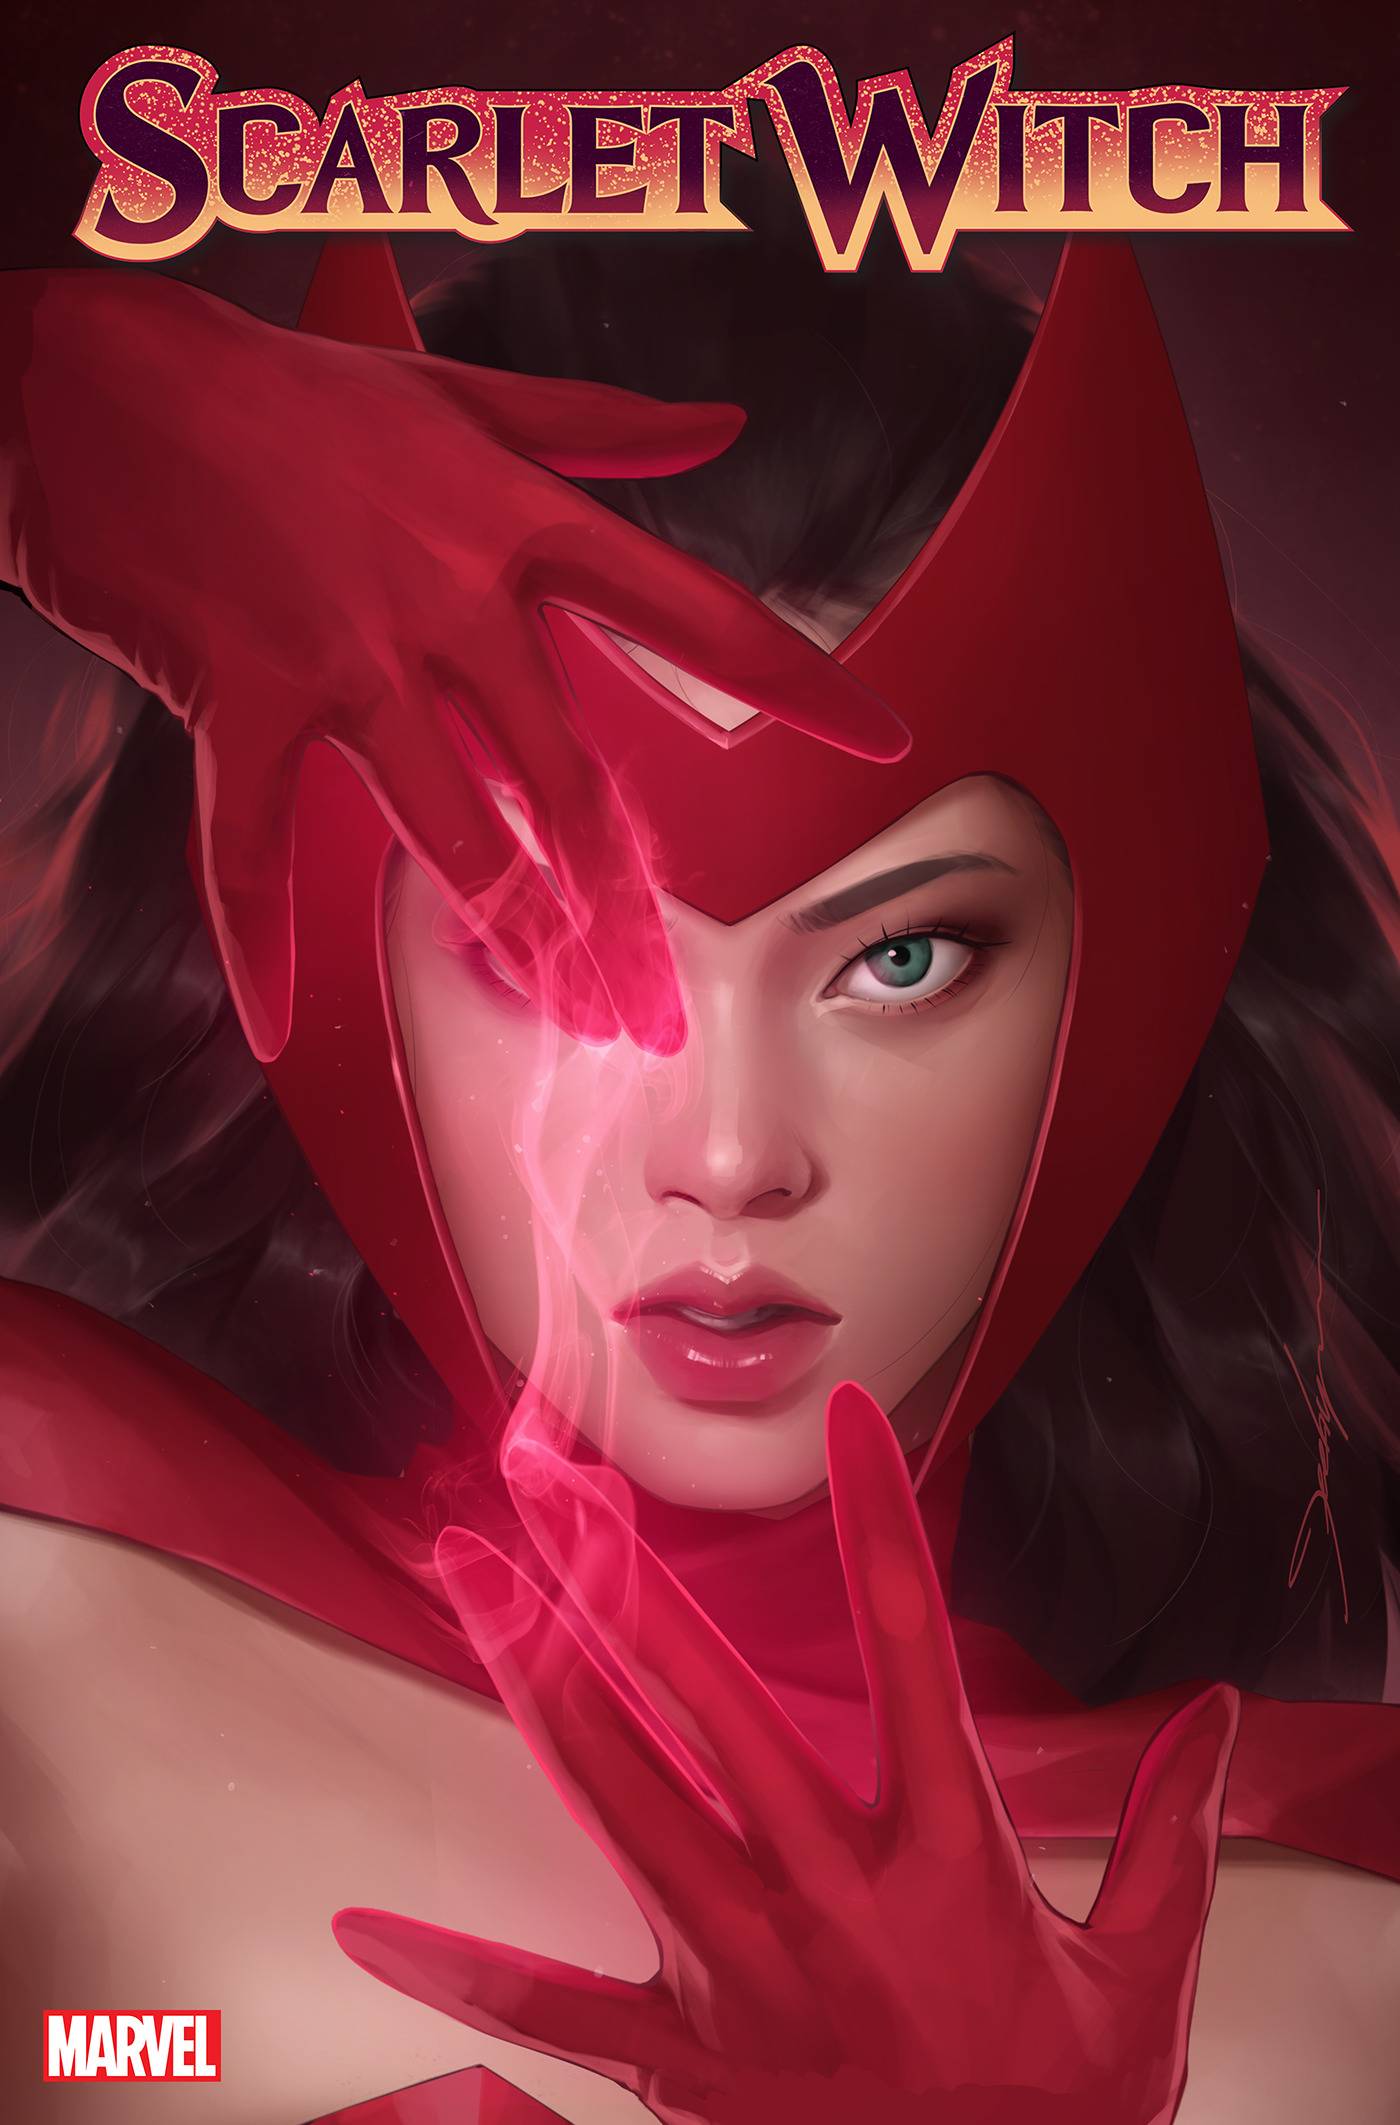 04/05/2023 SCARLET WITCH #4 JEEHYUNG LEE VARIANT